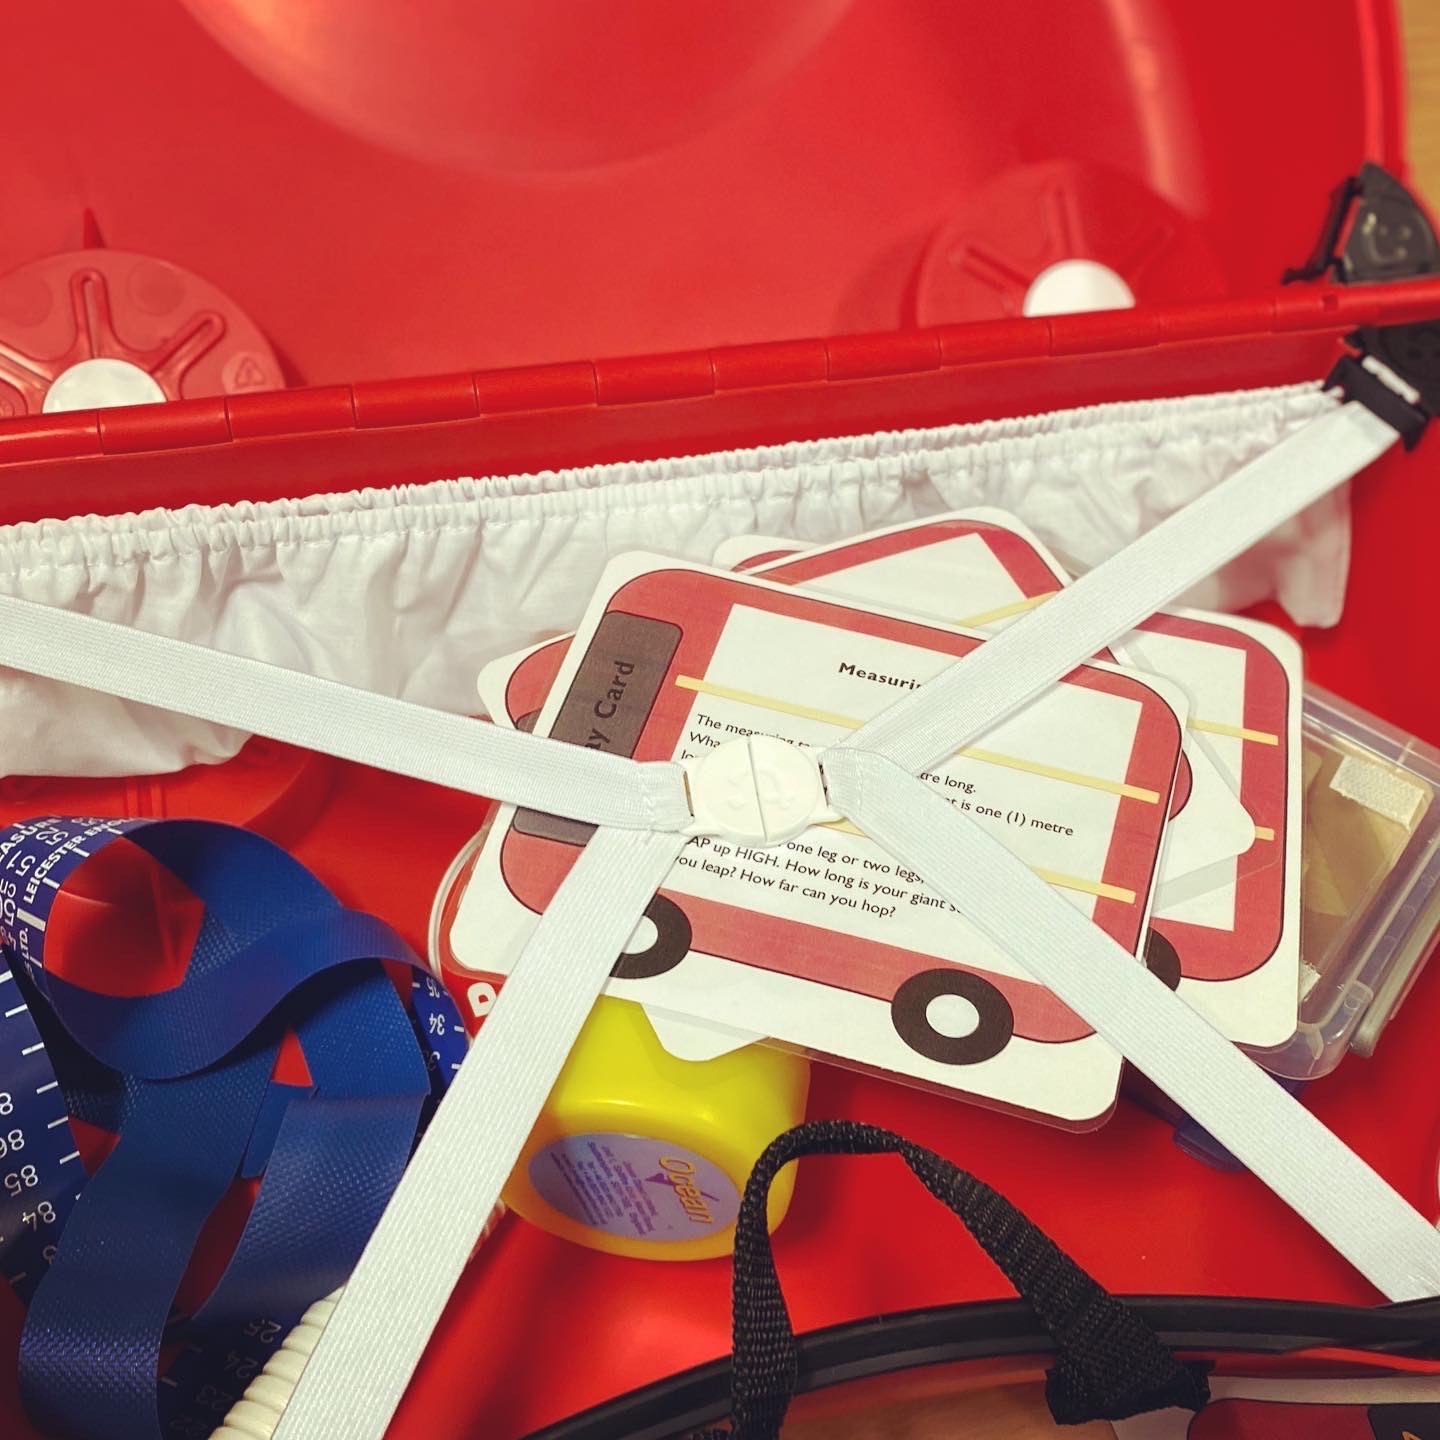 A photograph of a red trail box containing a measuring tape and activity cards